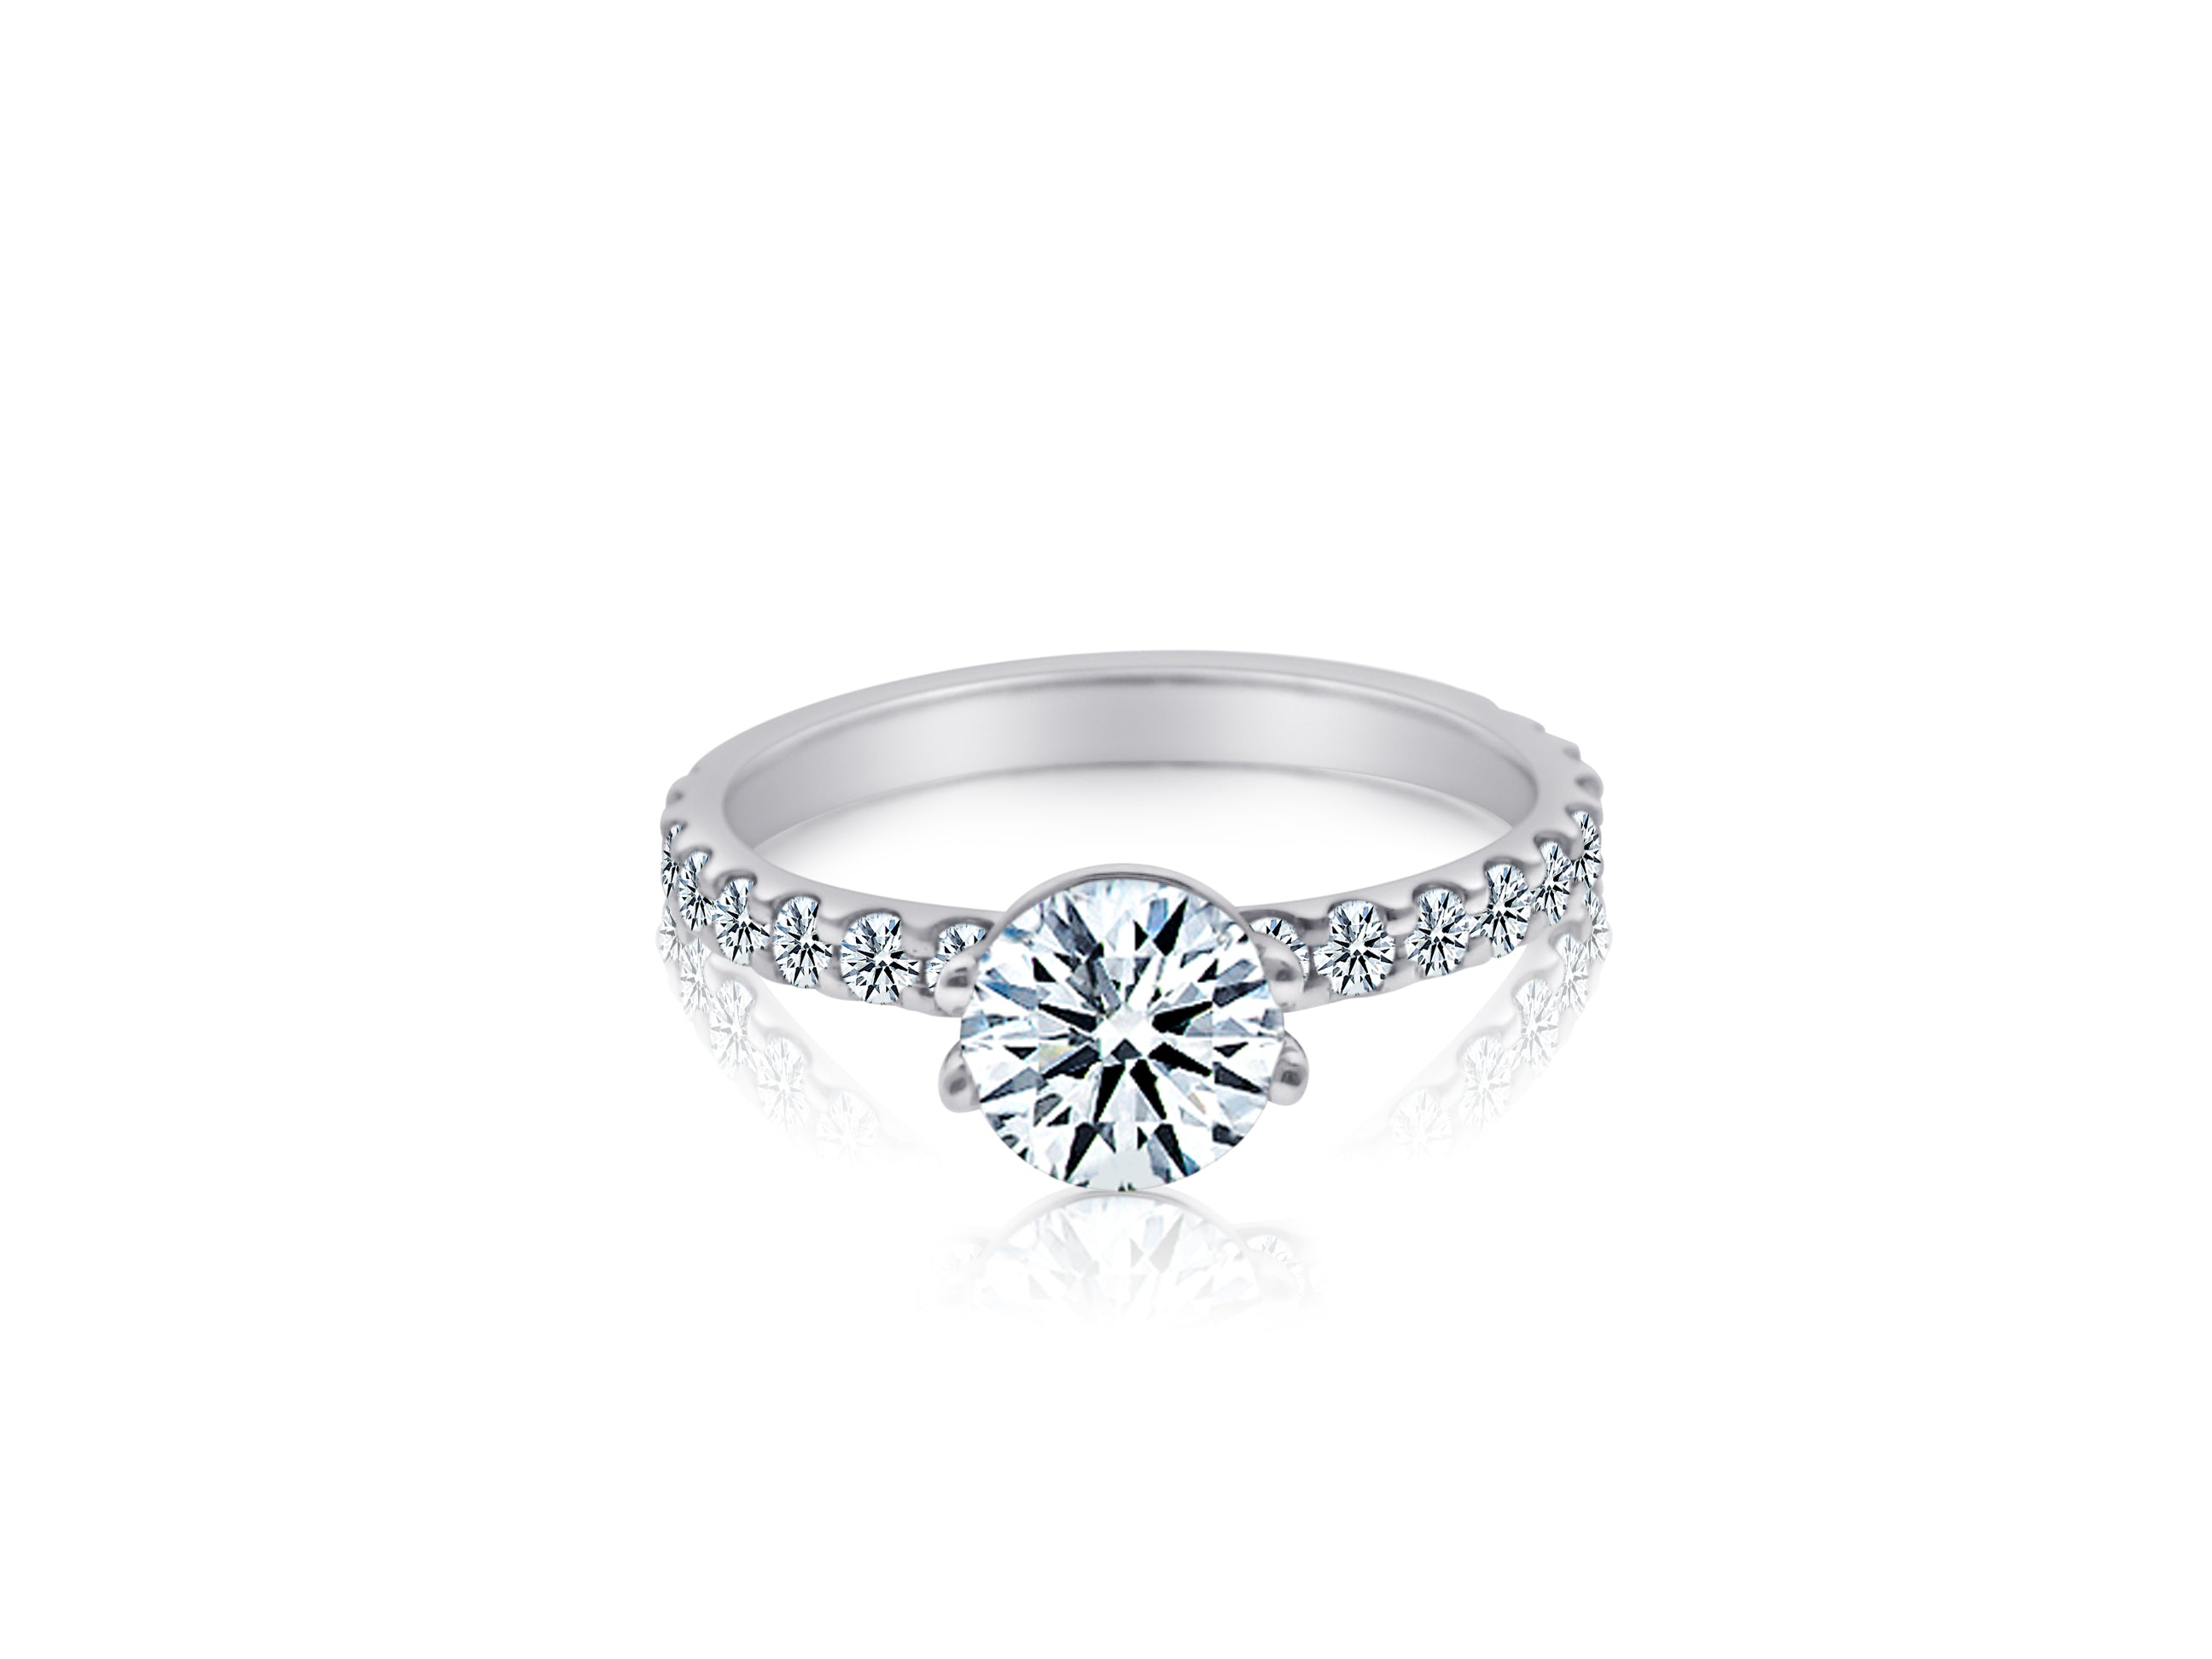 MEMOIRE 18K WHITE GOLD 0.77CT DIAMOND ENGAGEMENT RING MOUNTING (CENTER STONE SOLD SEPARATELY) FROM THE PETITE PRONG COLLECTION